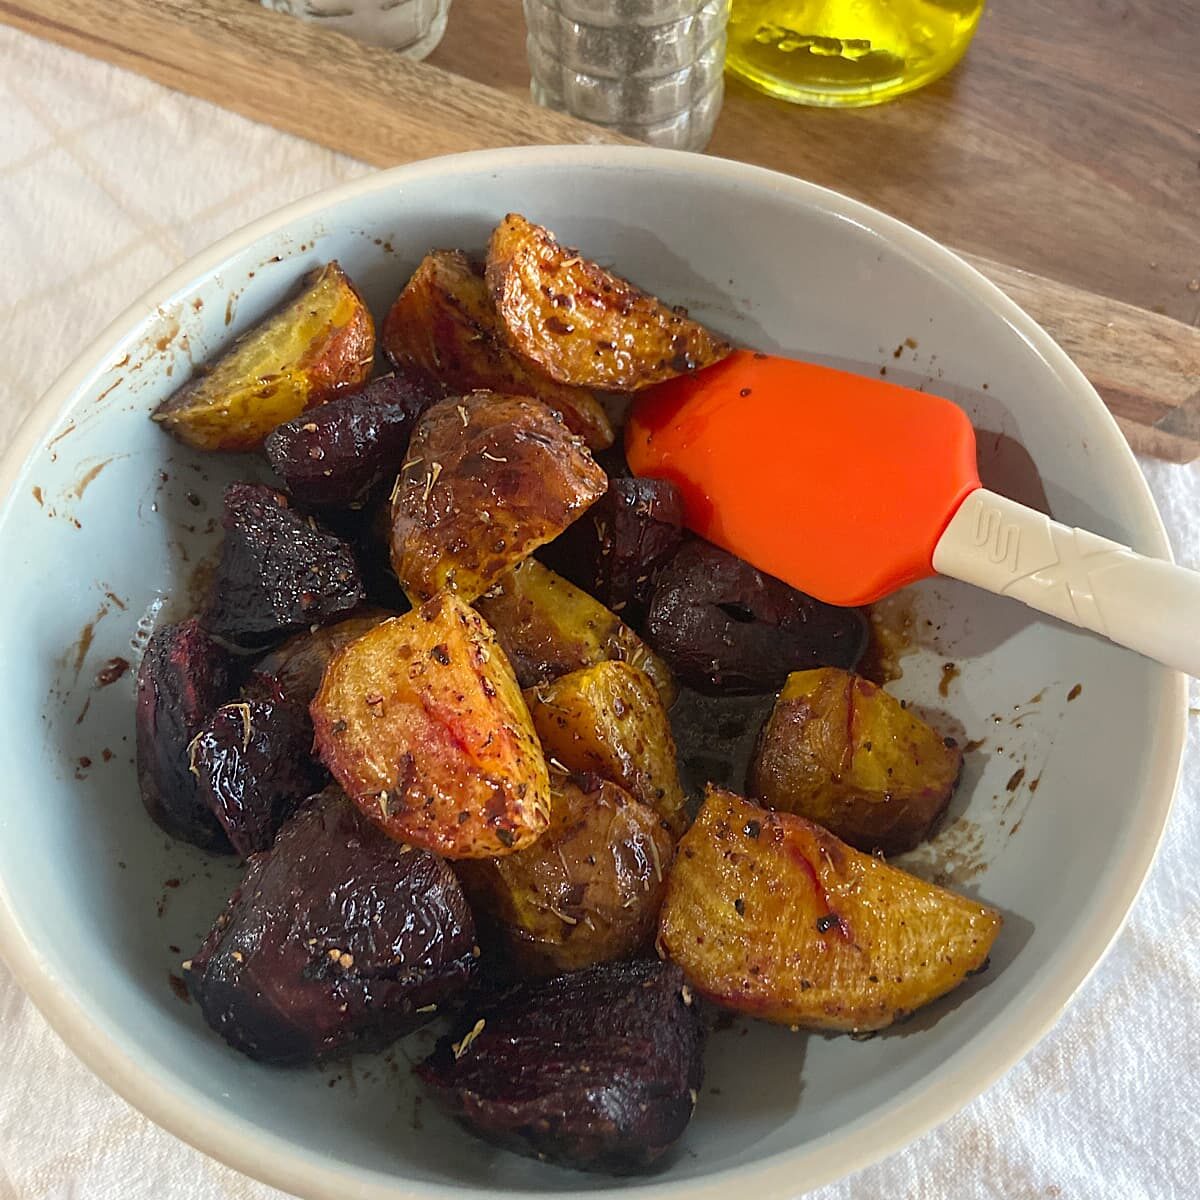 Toss roasted beets with vinaigrette